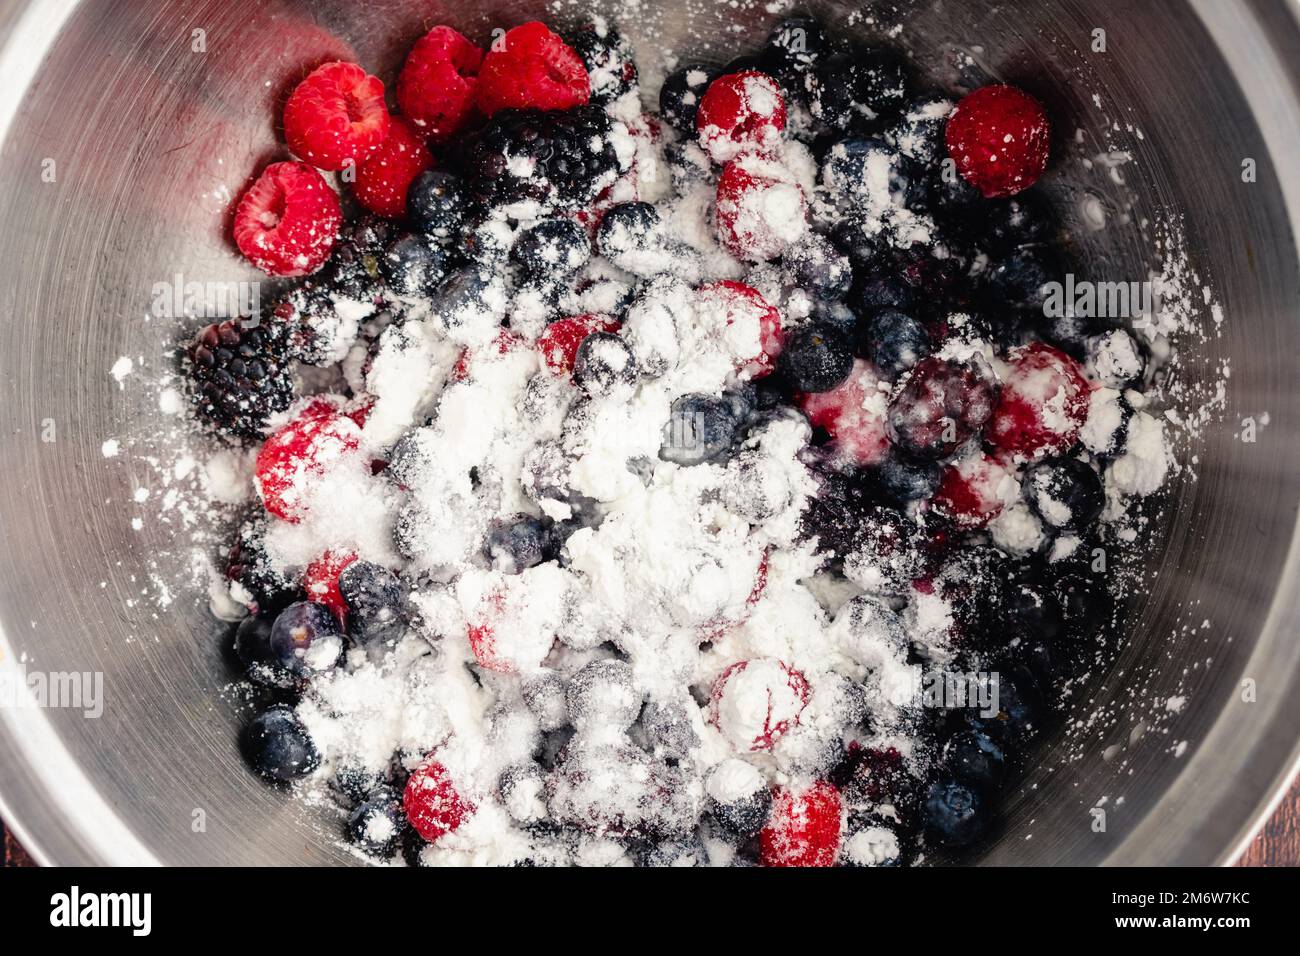 Mixed Berries Sprinkled with Cornstarch, Sugar, and Lemon Juice: Pie filling ingredients added to a mixing bowl full of fresh berries Stock Photo